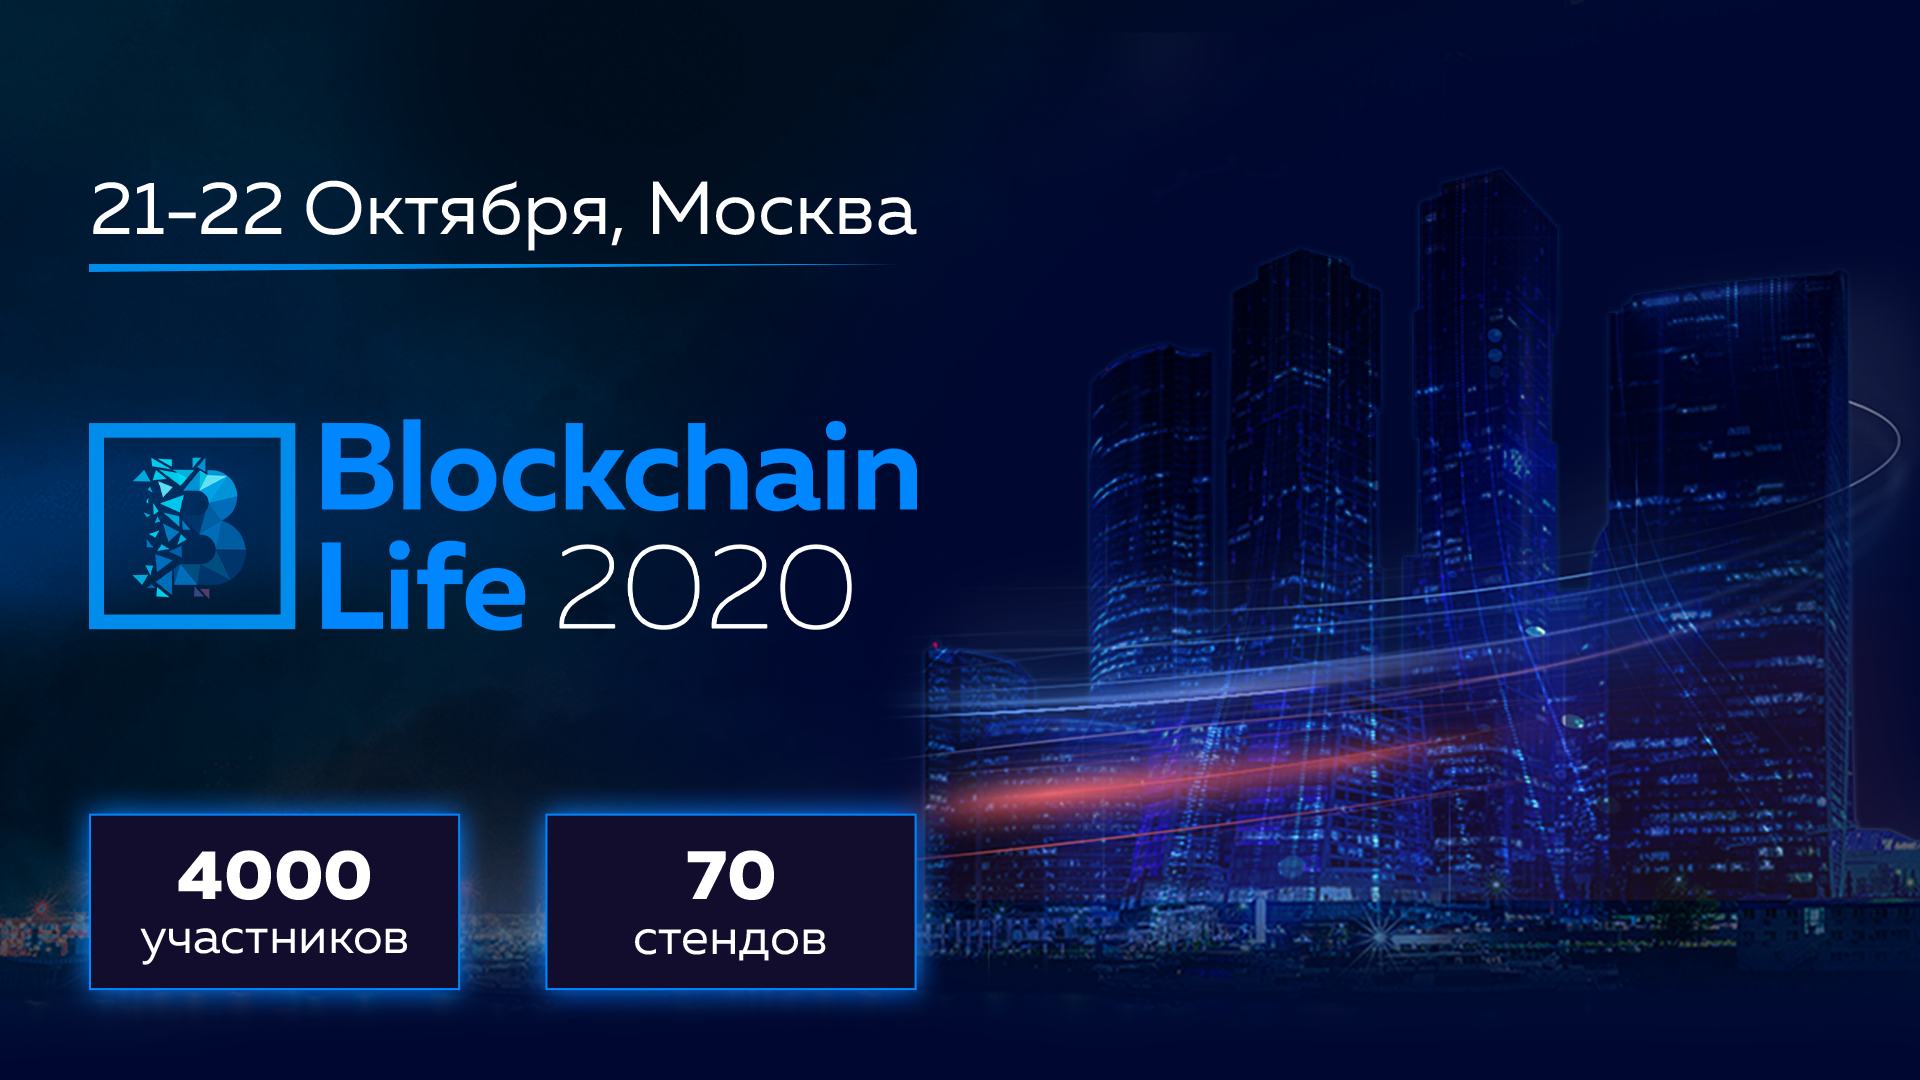 Blockchain Life 2020 will be held in Moscow on October 21-22